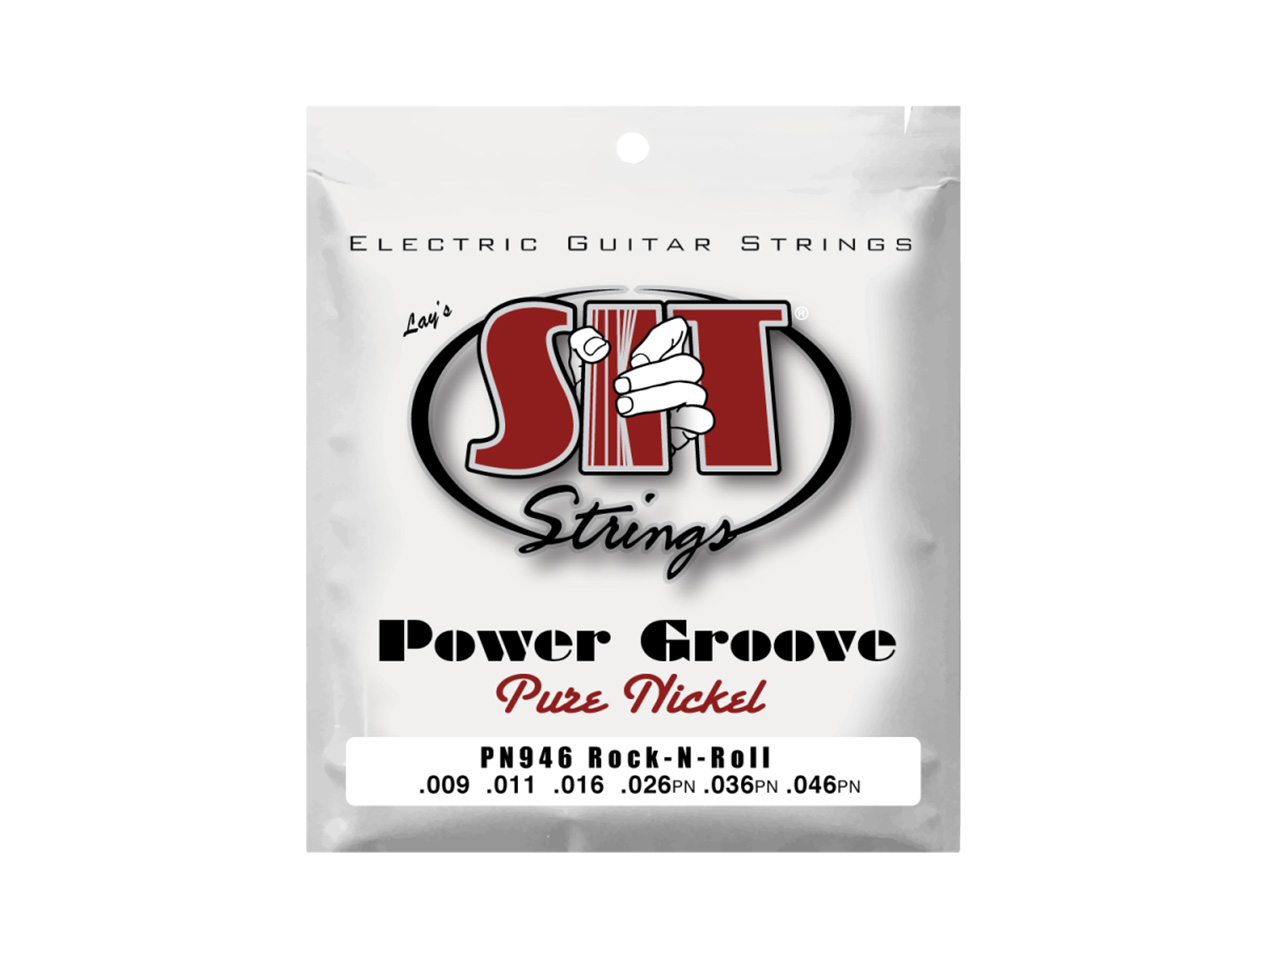 SIT(エスアイティー) POWER GROOVE -Pure Nickel Round Wound ROCK-N-ROLL / PN946 (エレキギター弦)